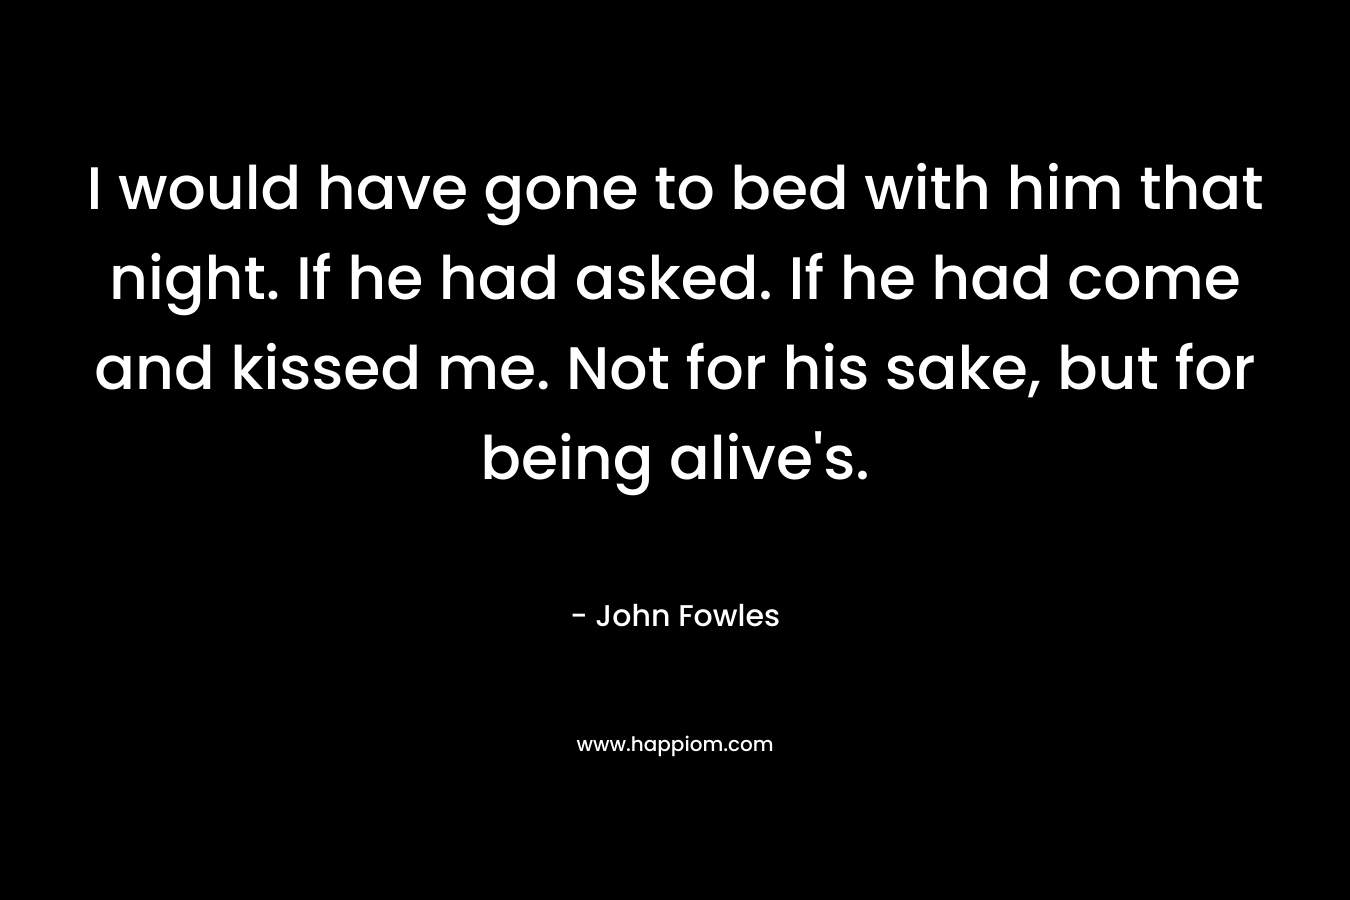 I would have gone to bed with him that night. If he had asked. If he had come and kissed me. Not for his sake, but for being alive's.